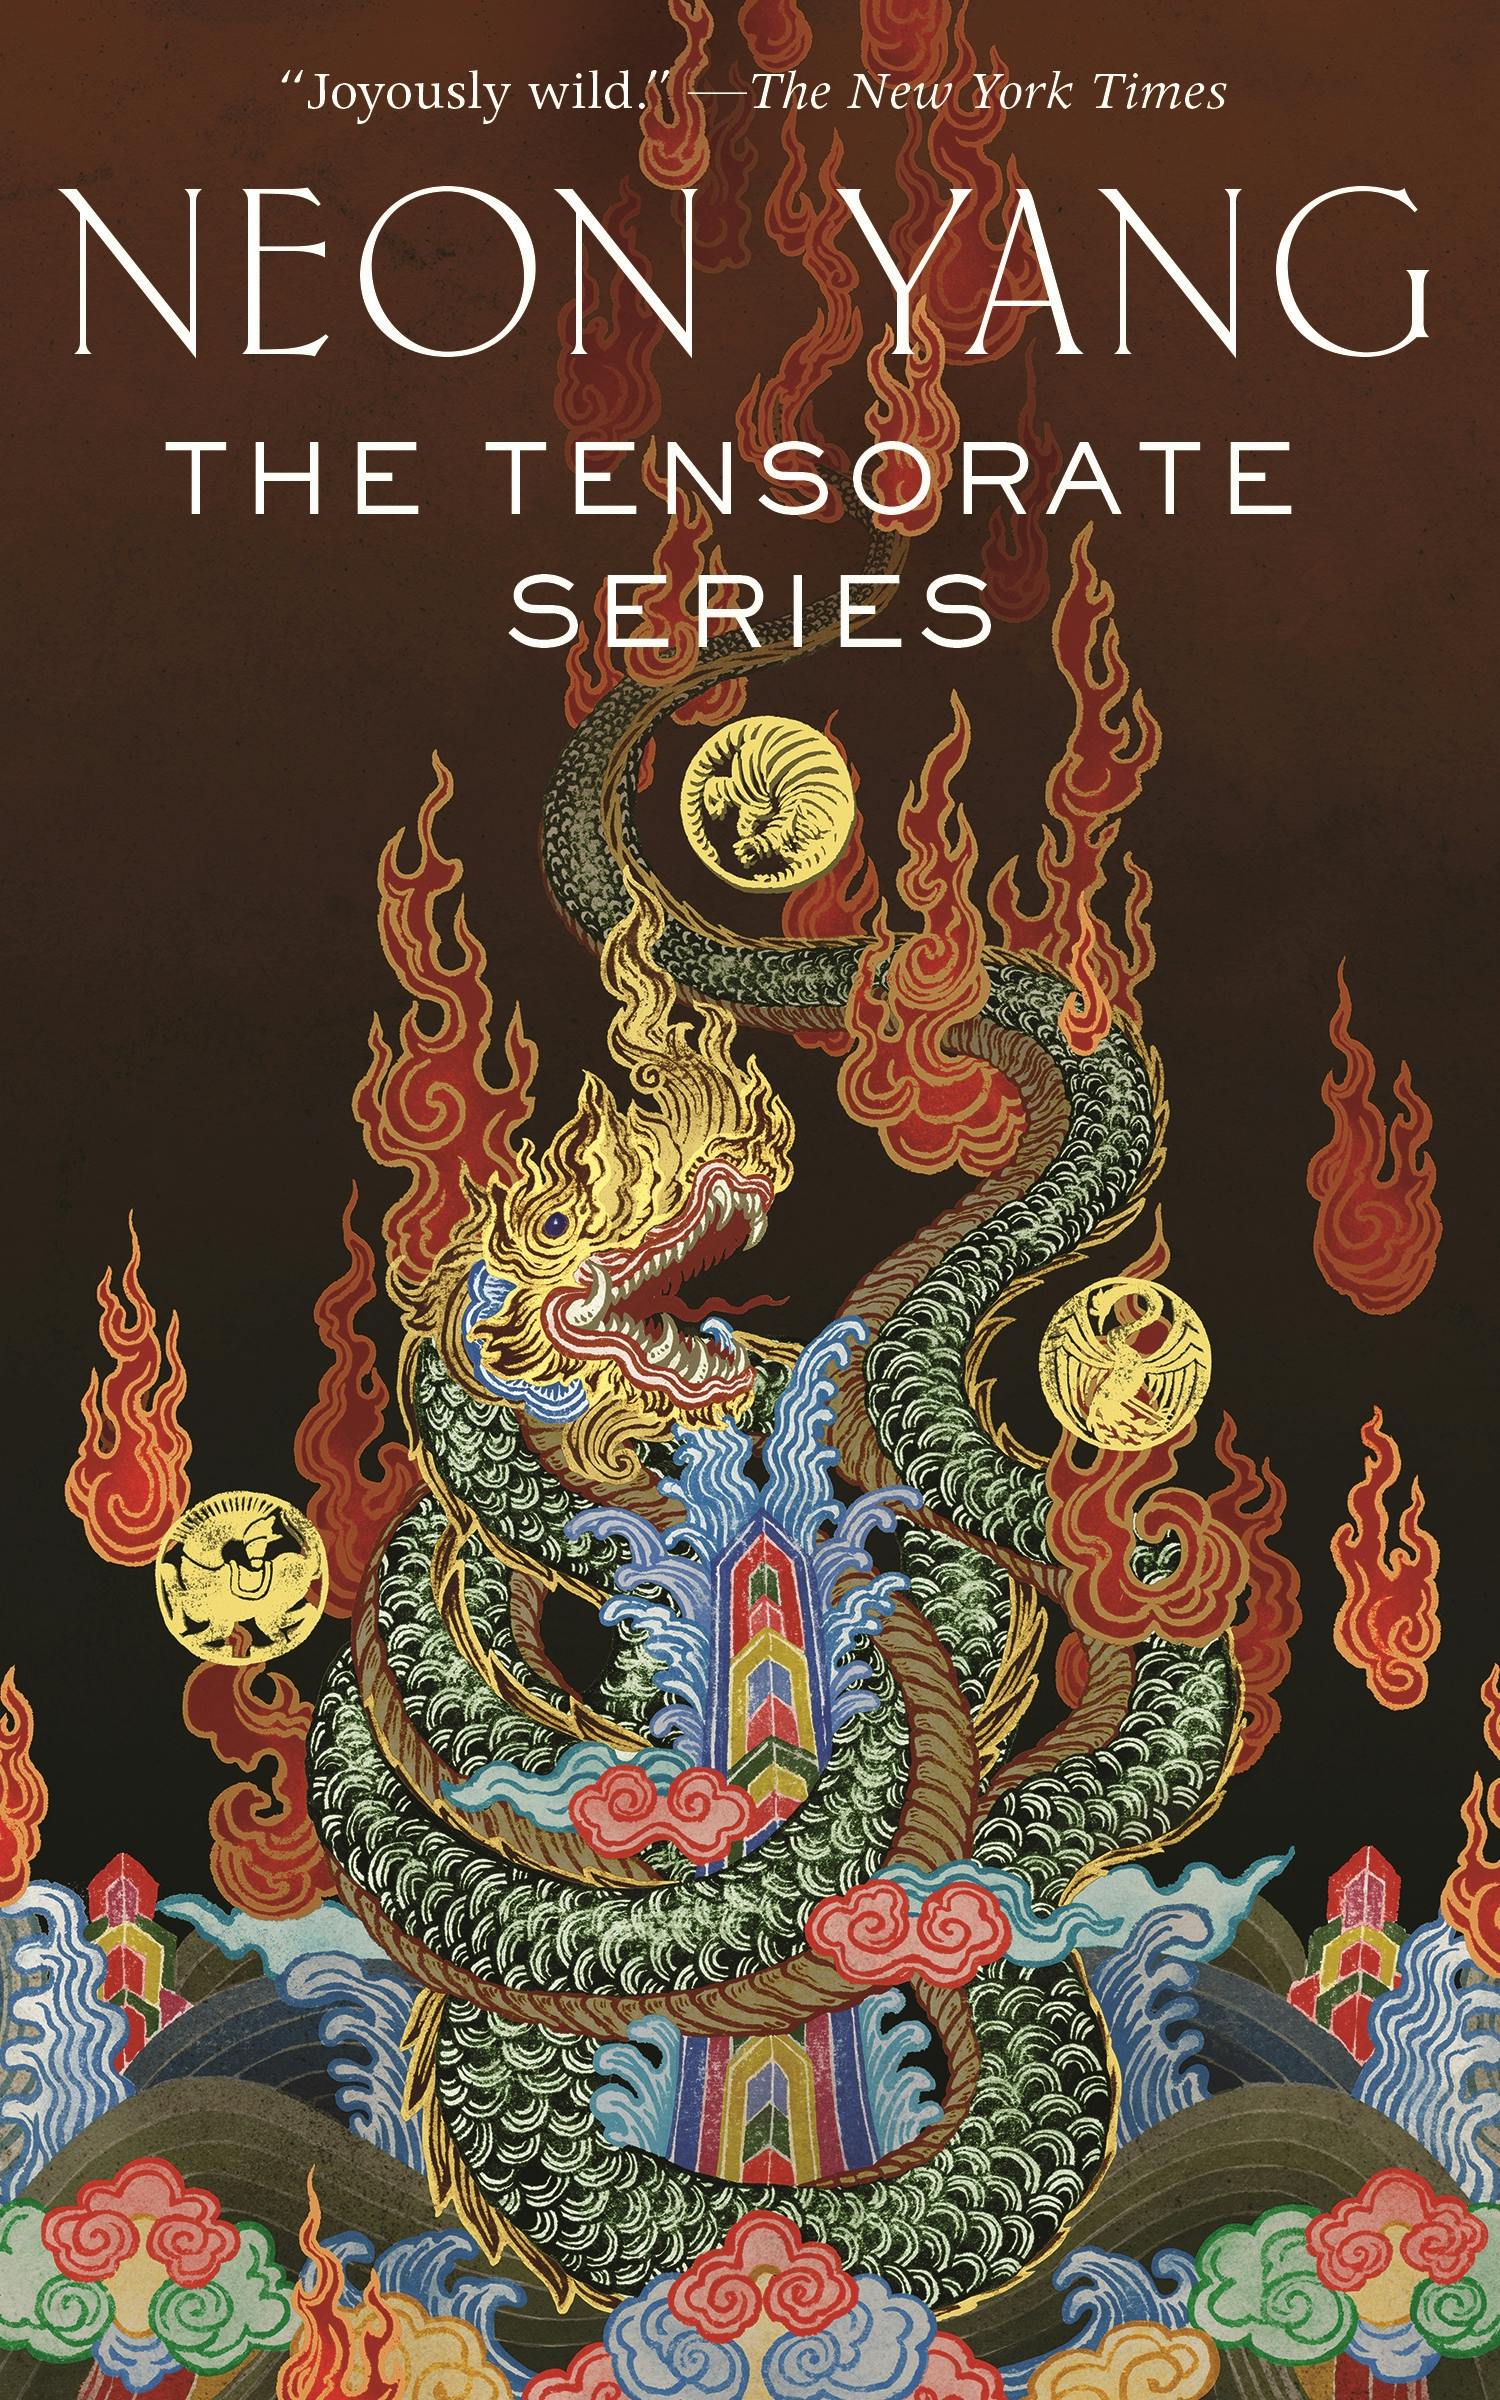 Cover for the book titled as: The Tensorate Series